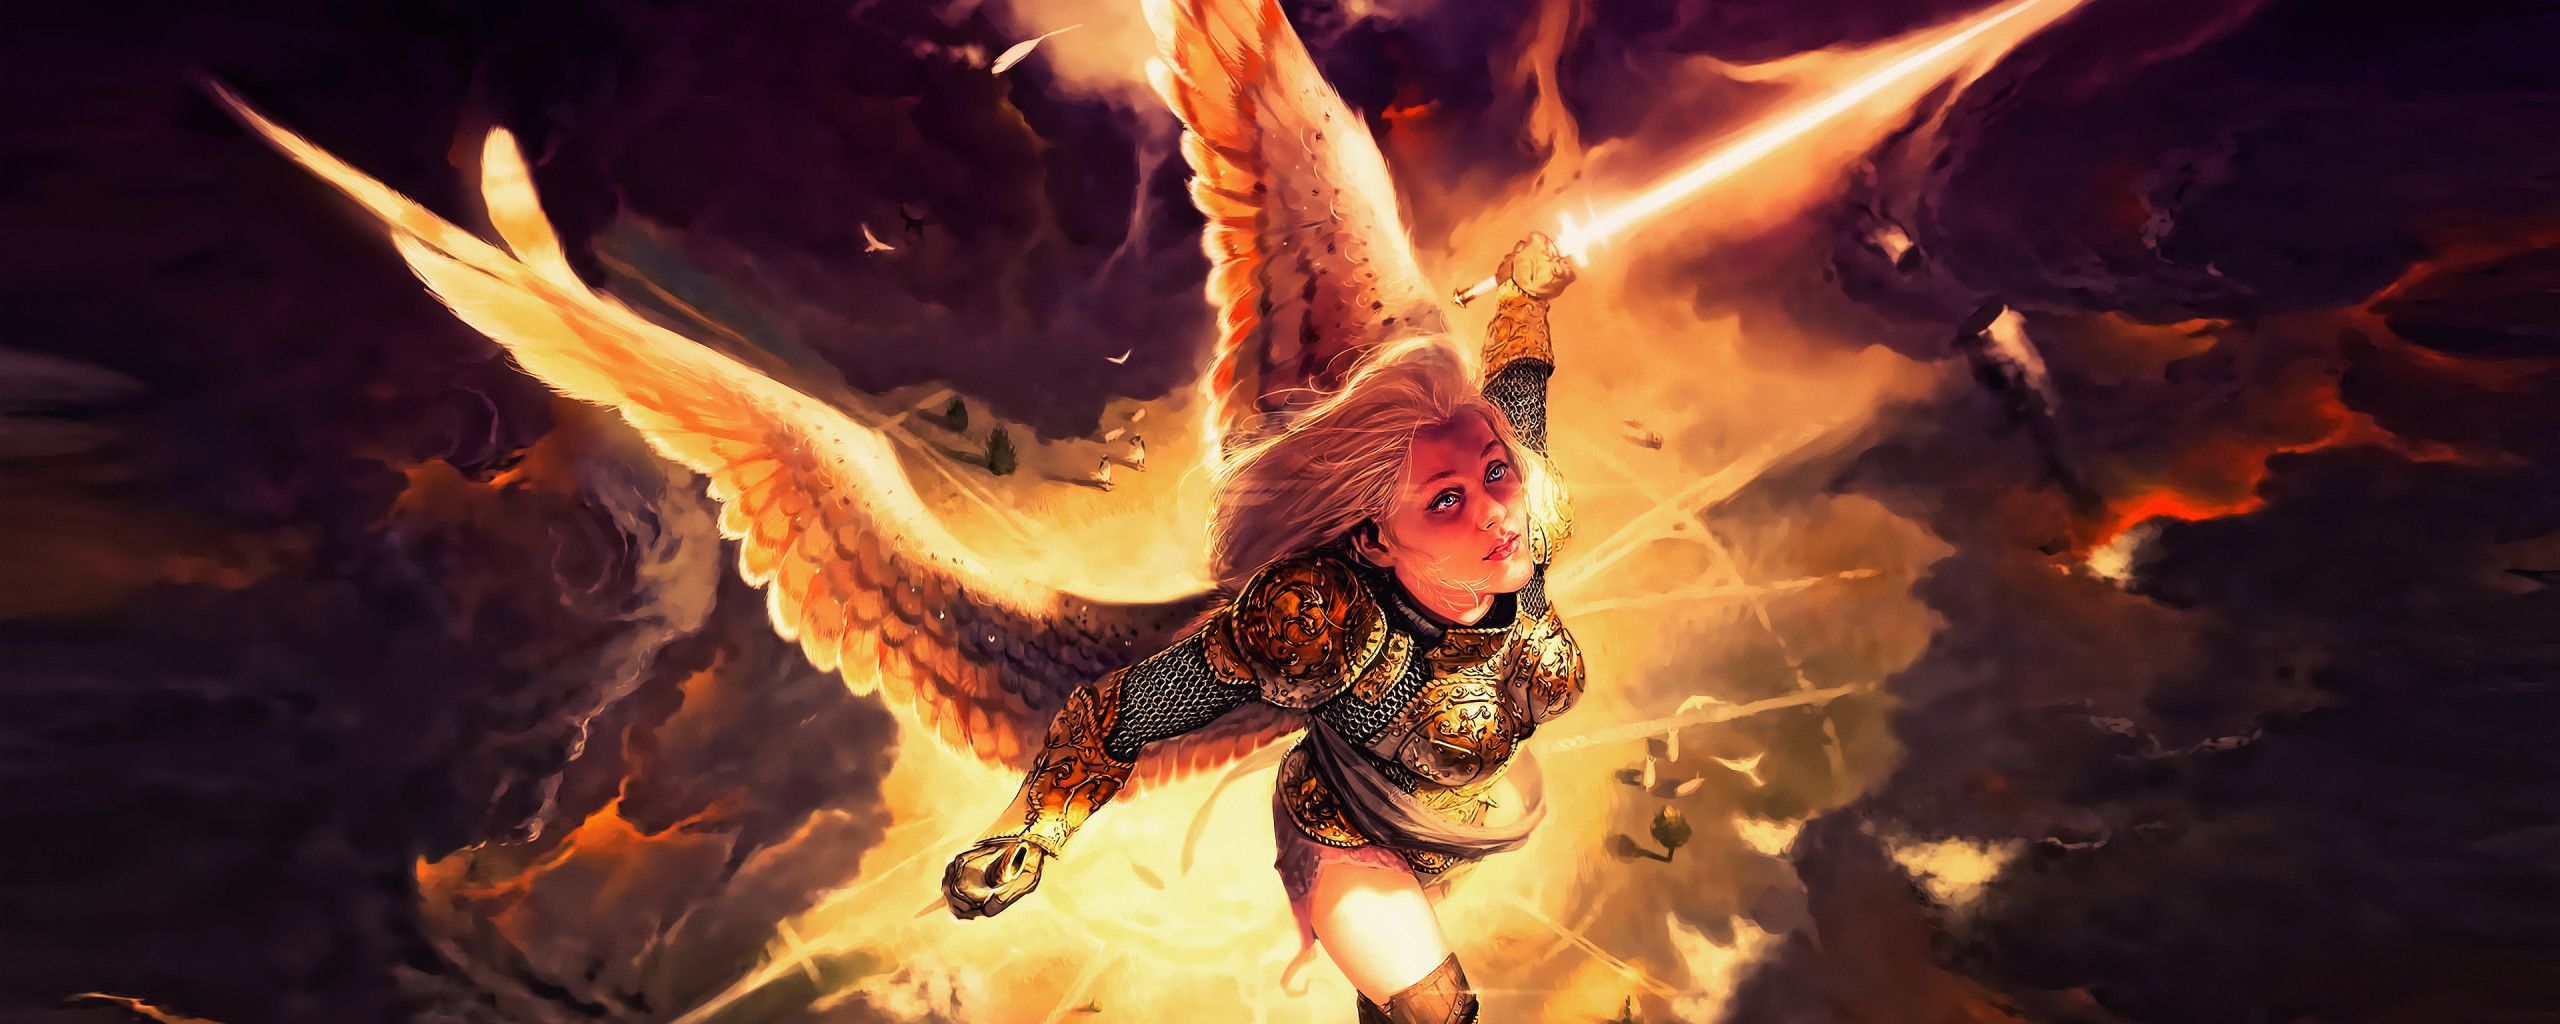 Gold Angel Fantasy Girl With Wings 4k 2560x1024